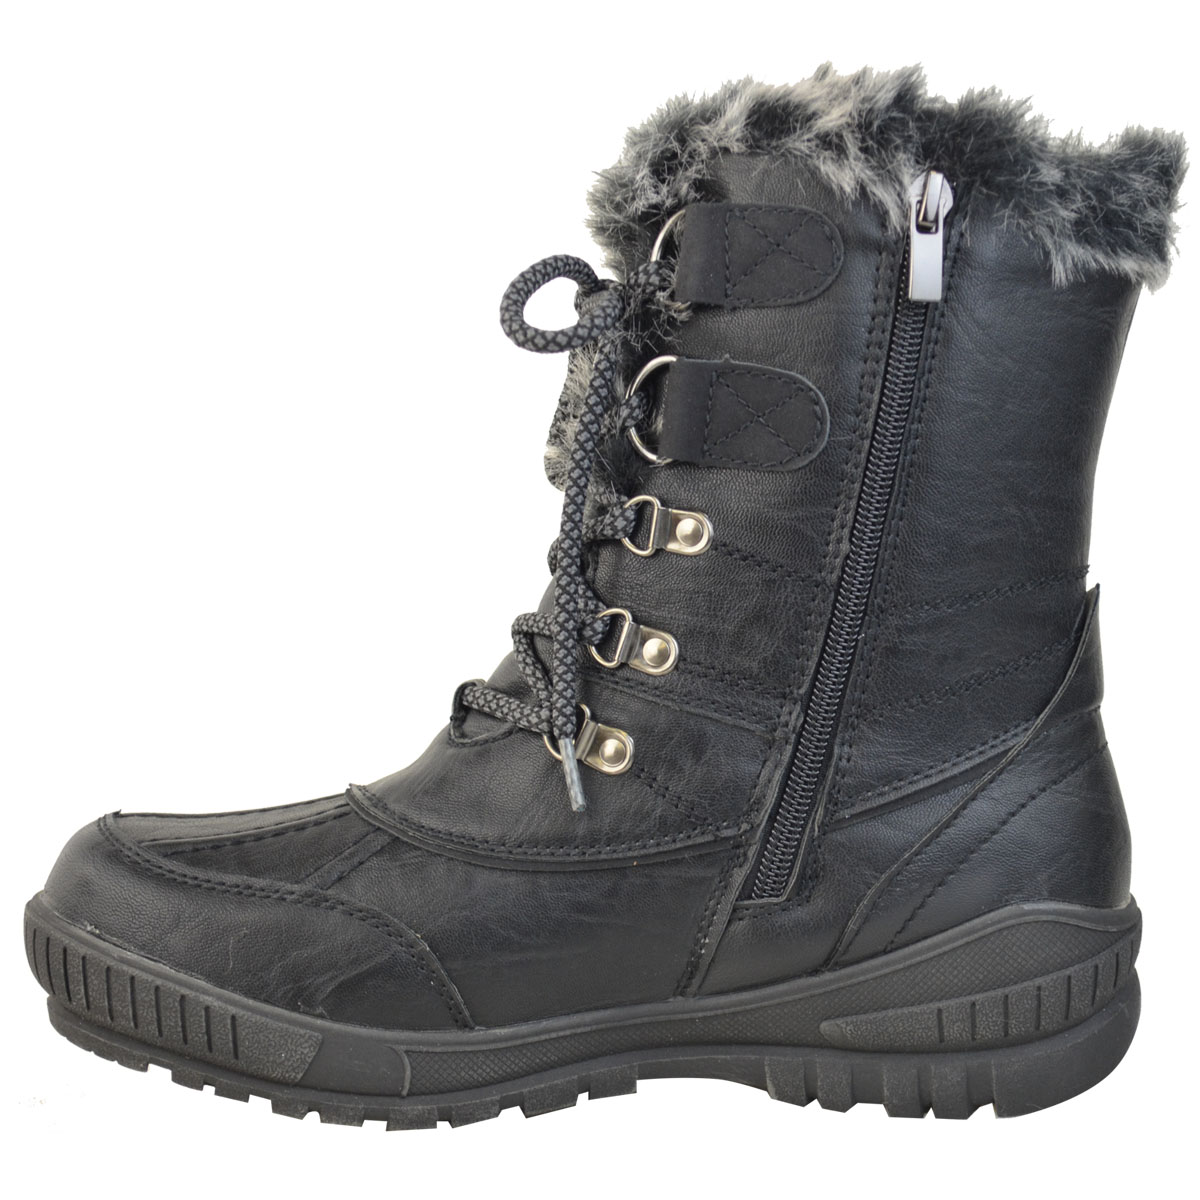 Womens Ladies Snow Ski Ankle Boots Winter Rain Thermal Fully Fur Lined ...